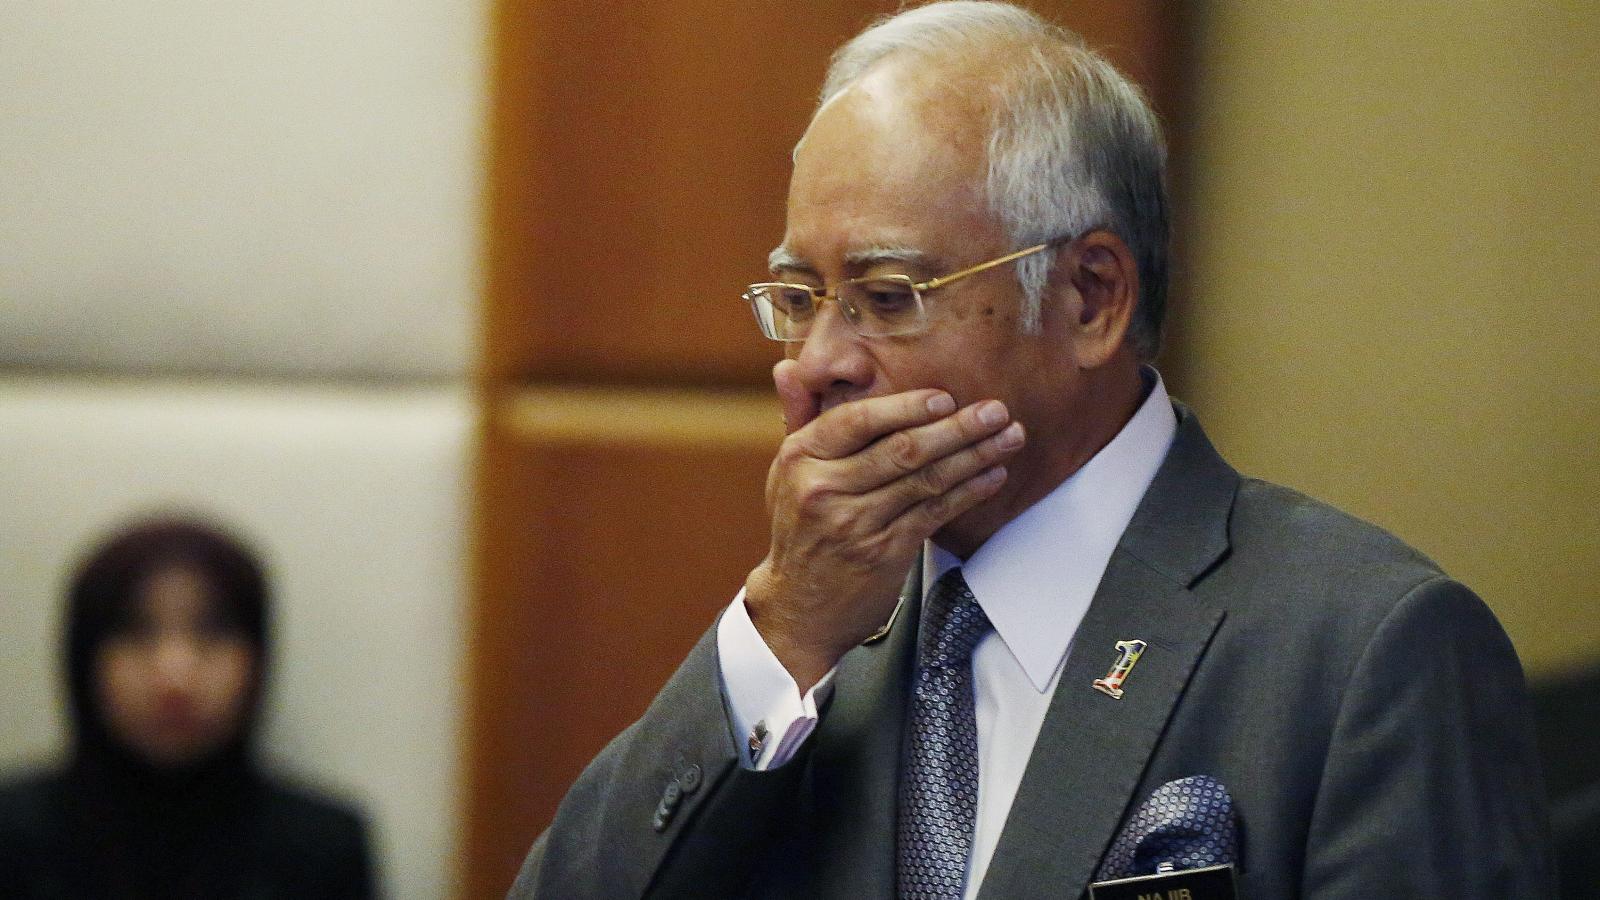 Najib's medication was not changed, as previously claimed by his special officer. Image credit: The Leaders Online